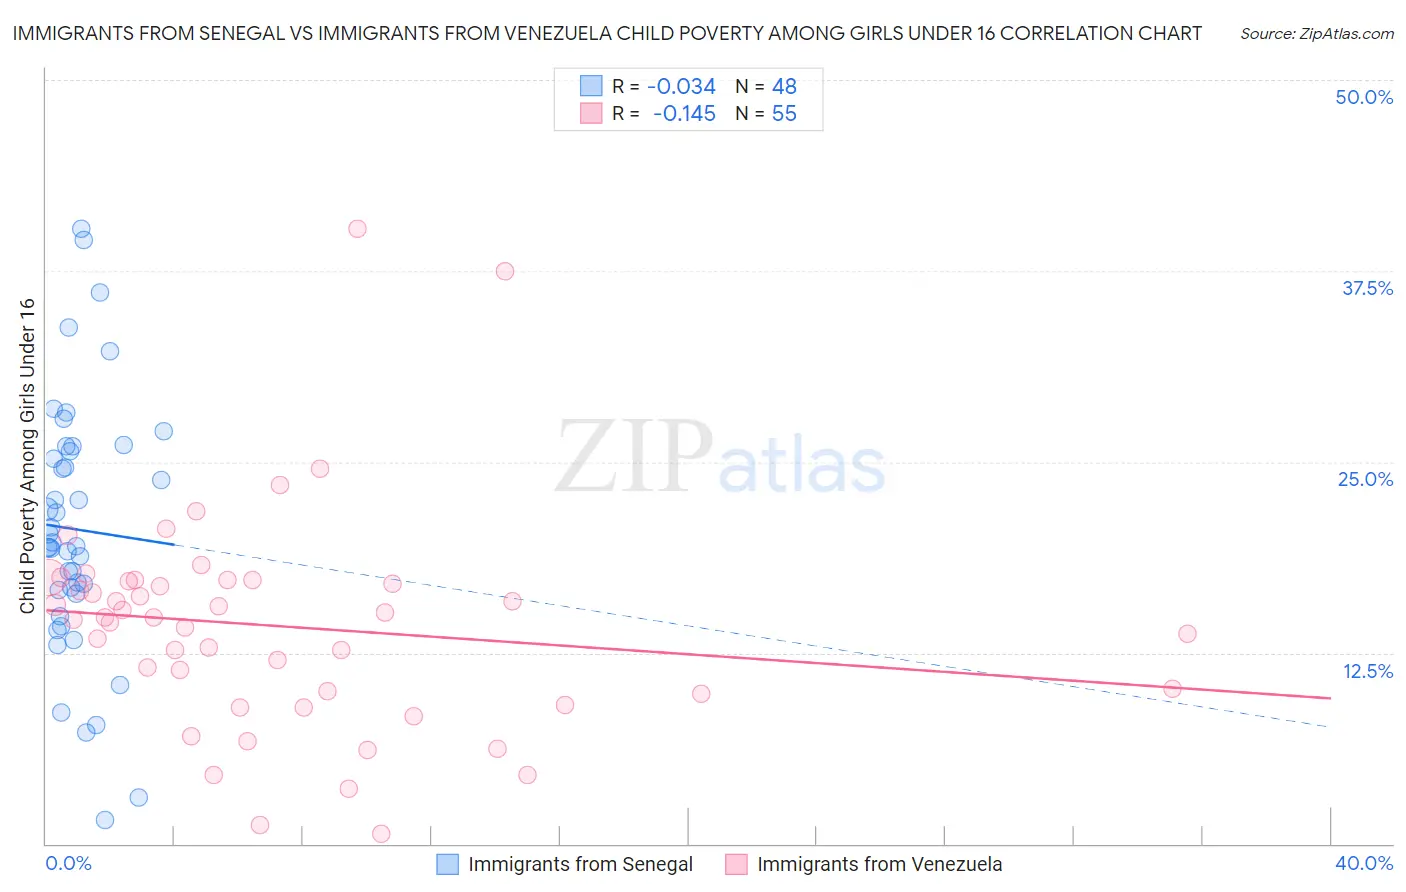 Immigrants from Senegal vs Immigrants from Venezuela Child Poverty Among Girls Under 16